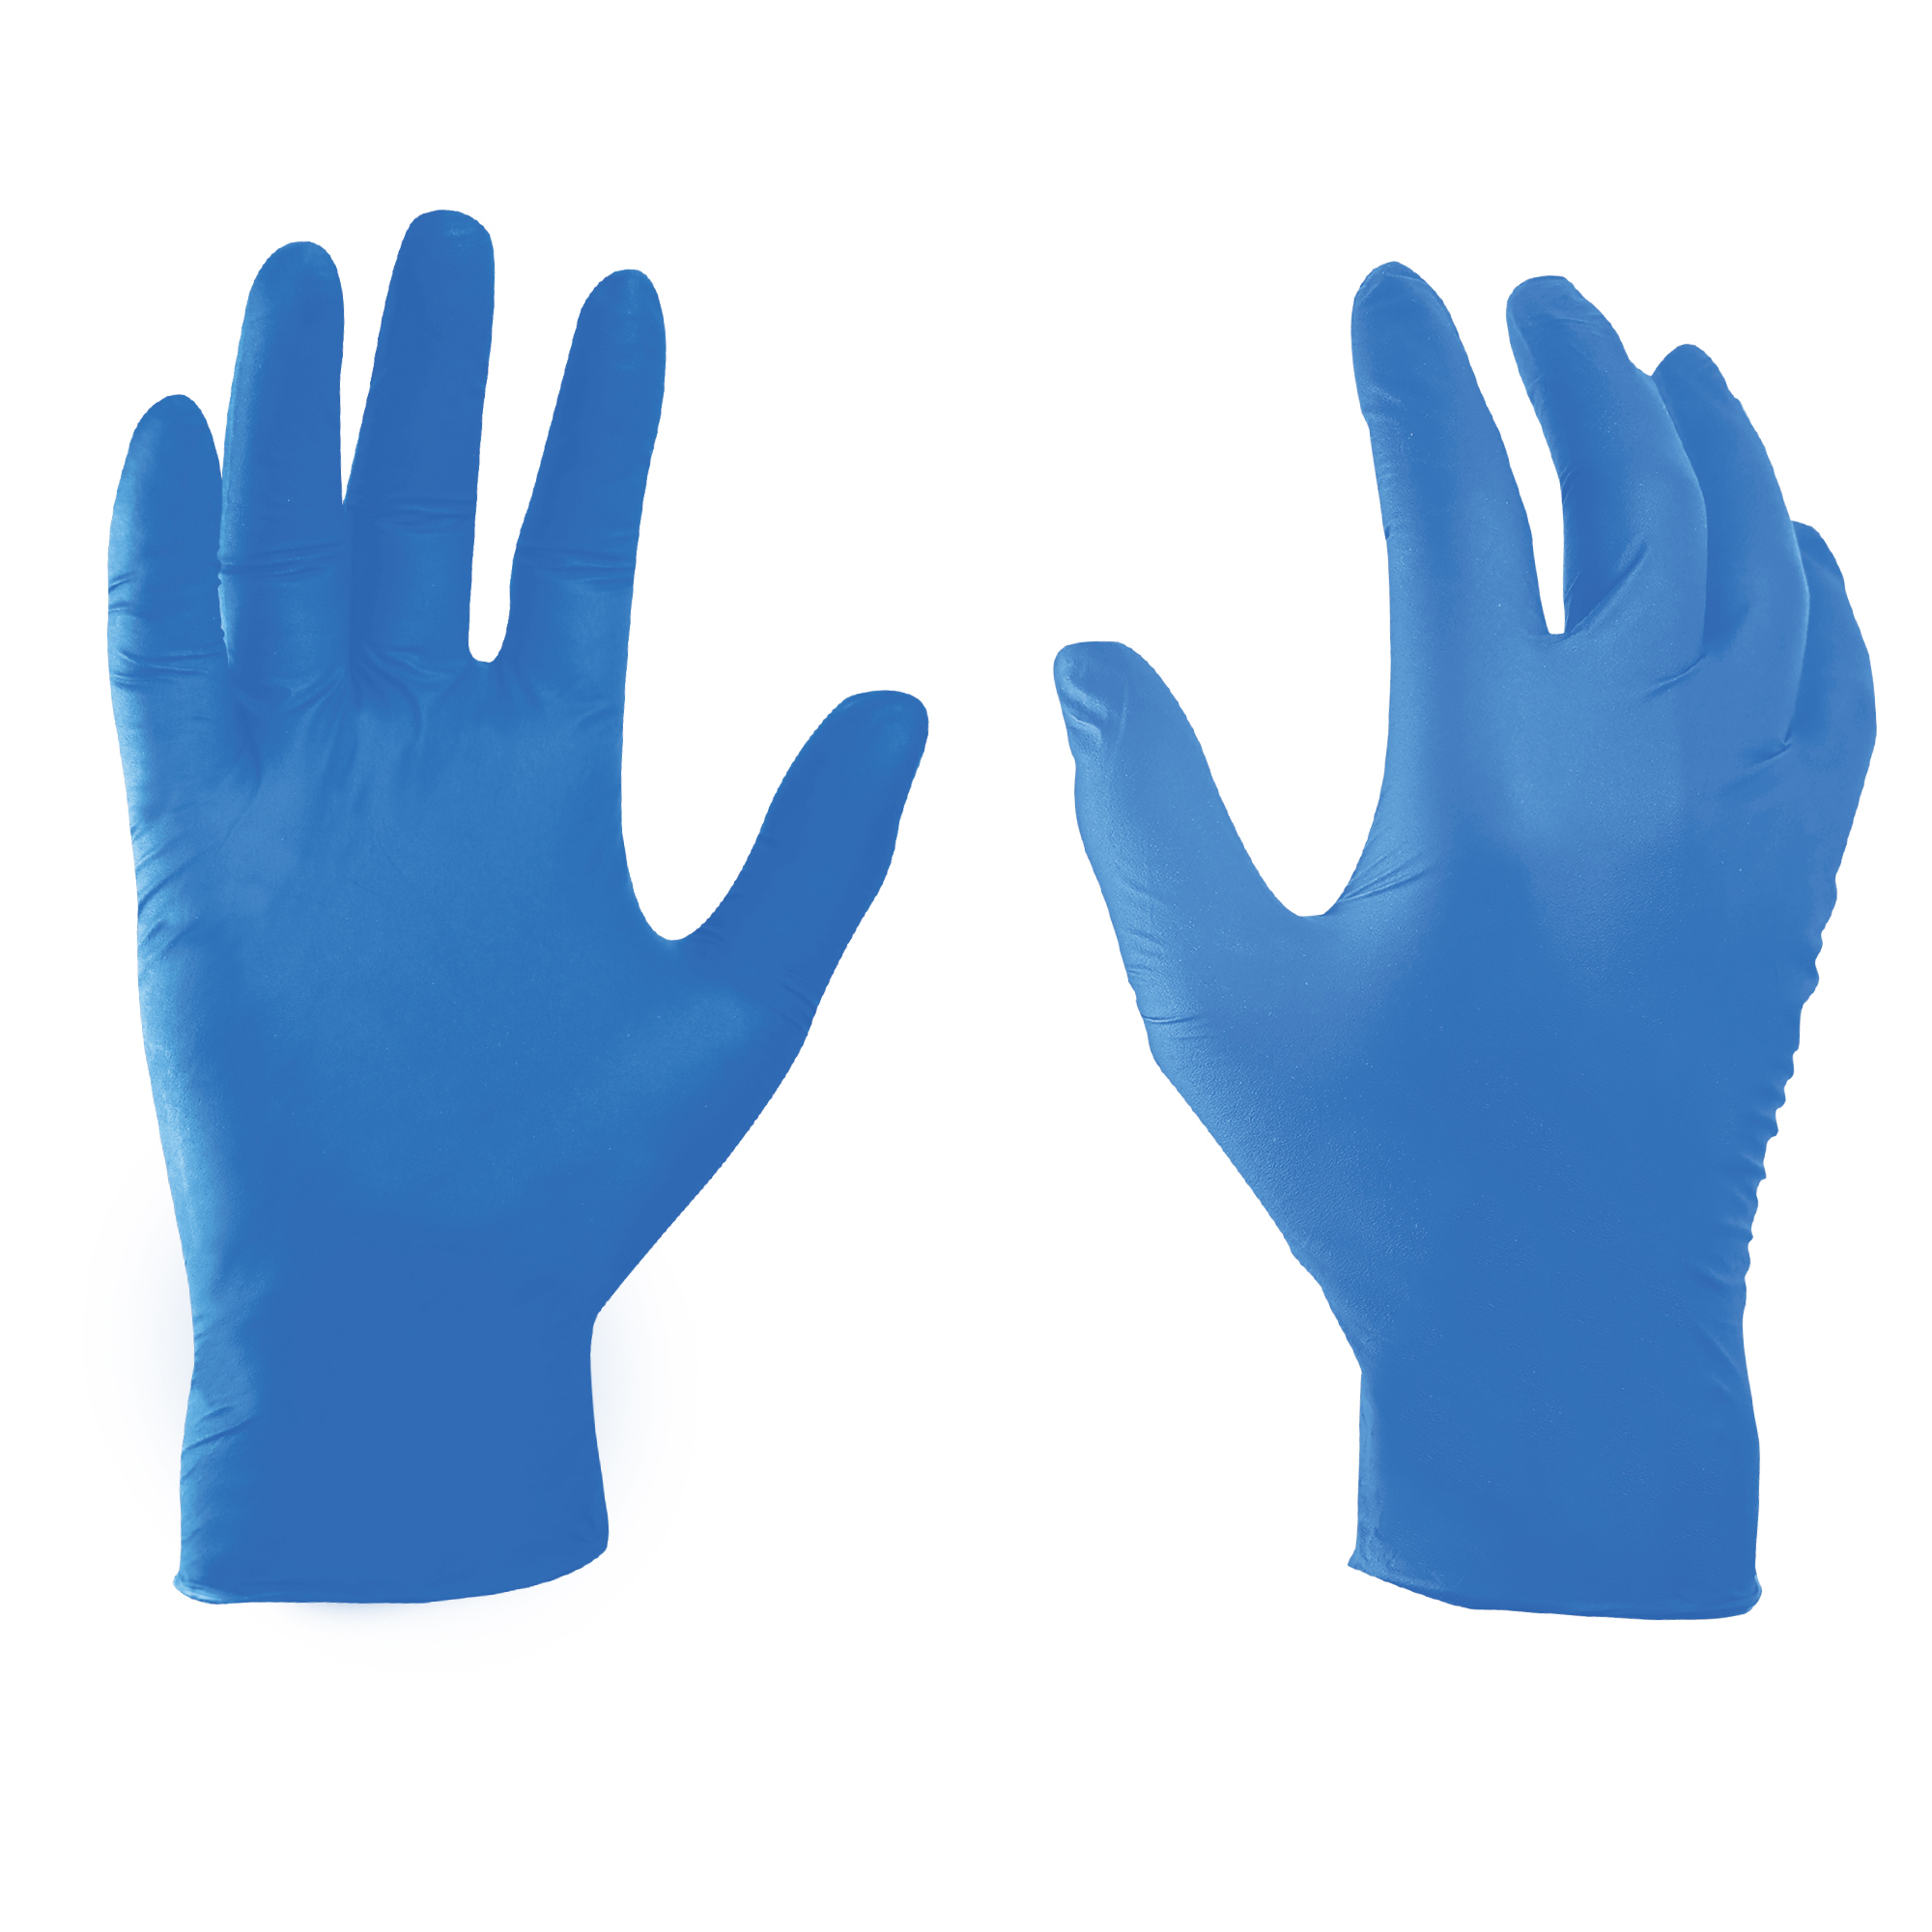 General Electric, 4mil Nitrile Blue Medium Gloves 100pk, Size M, Color Blue, Included (qty.) 100 Model GG600M